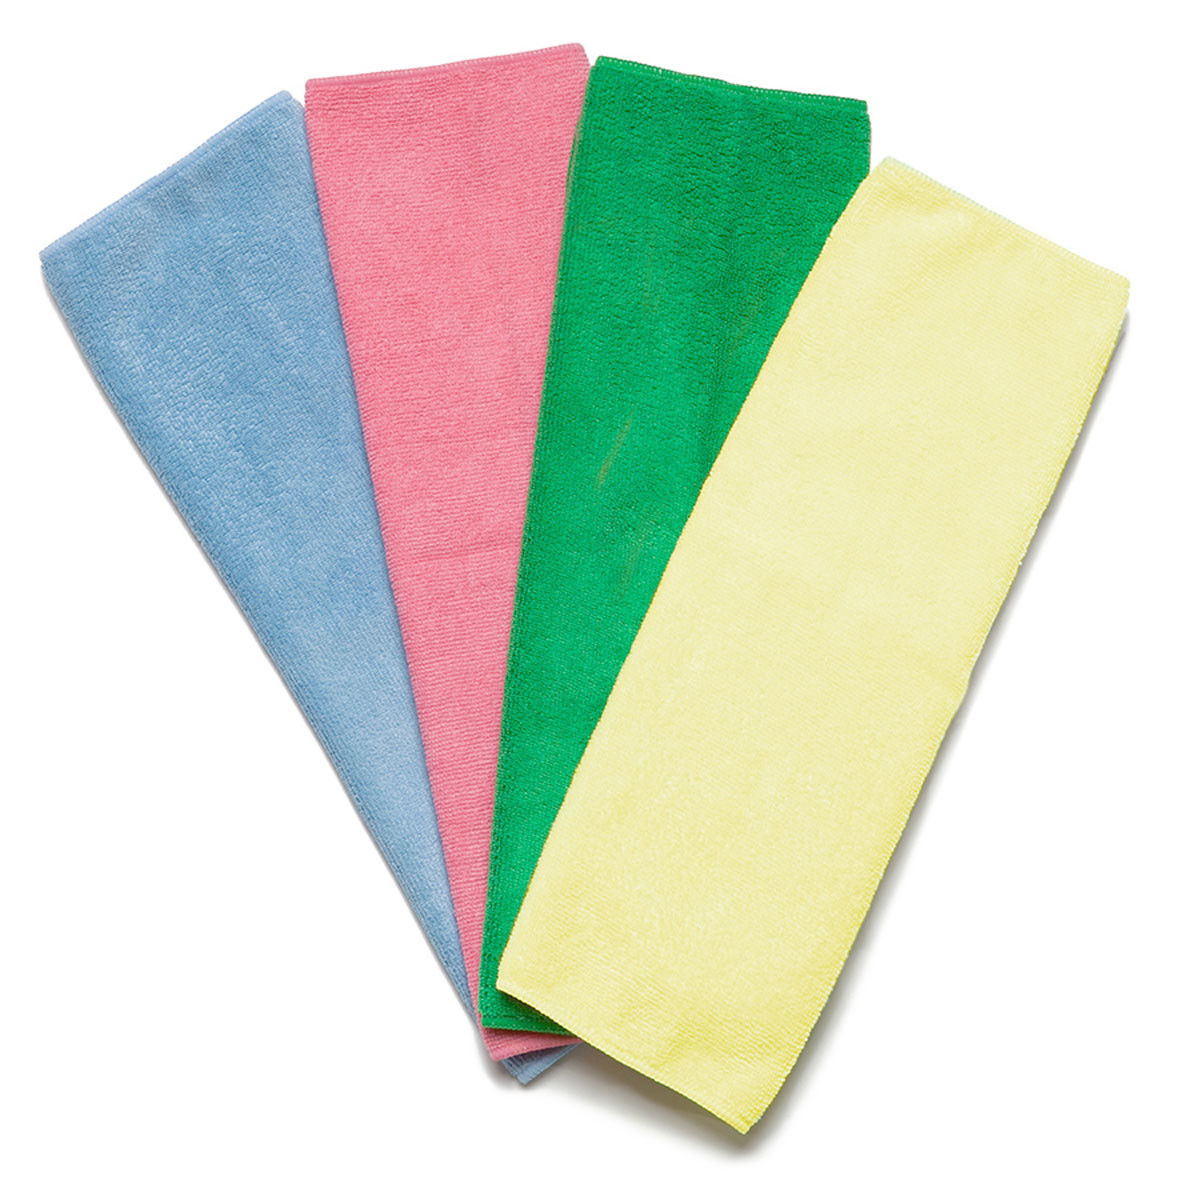 What materials are these cleaning towels made of?